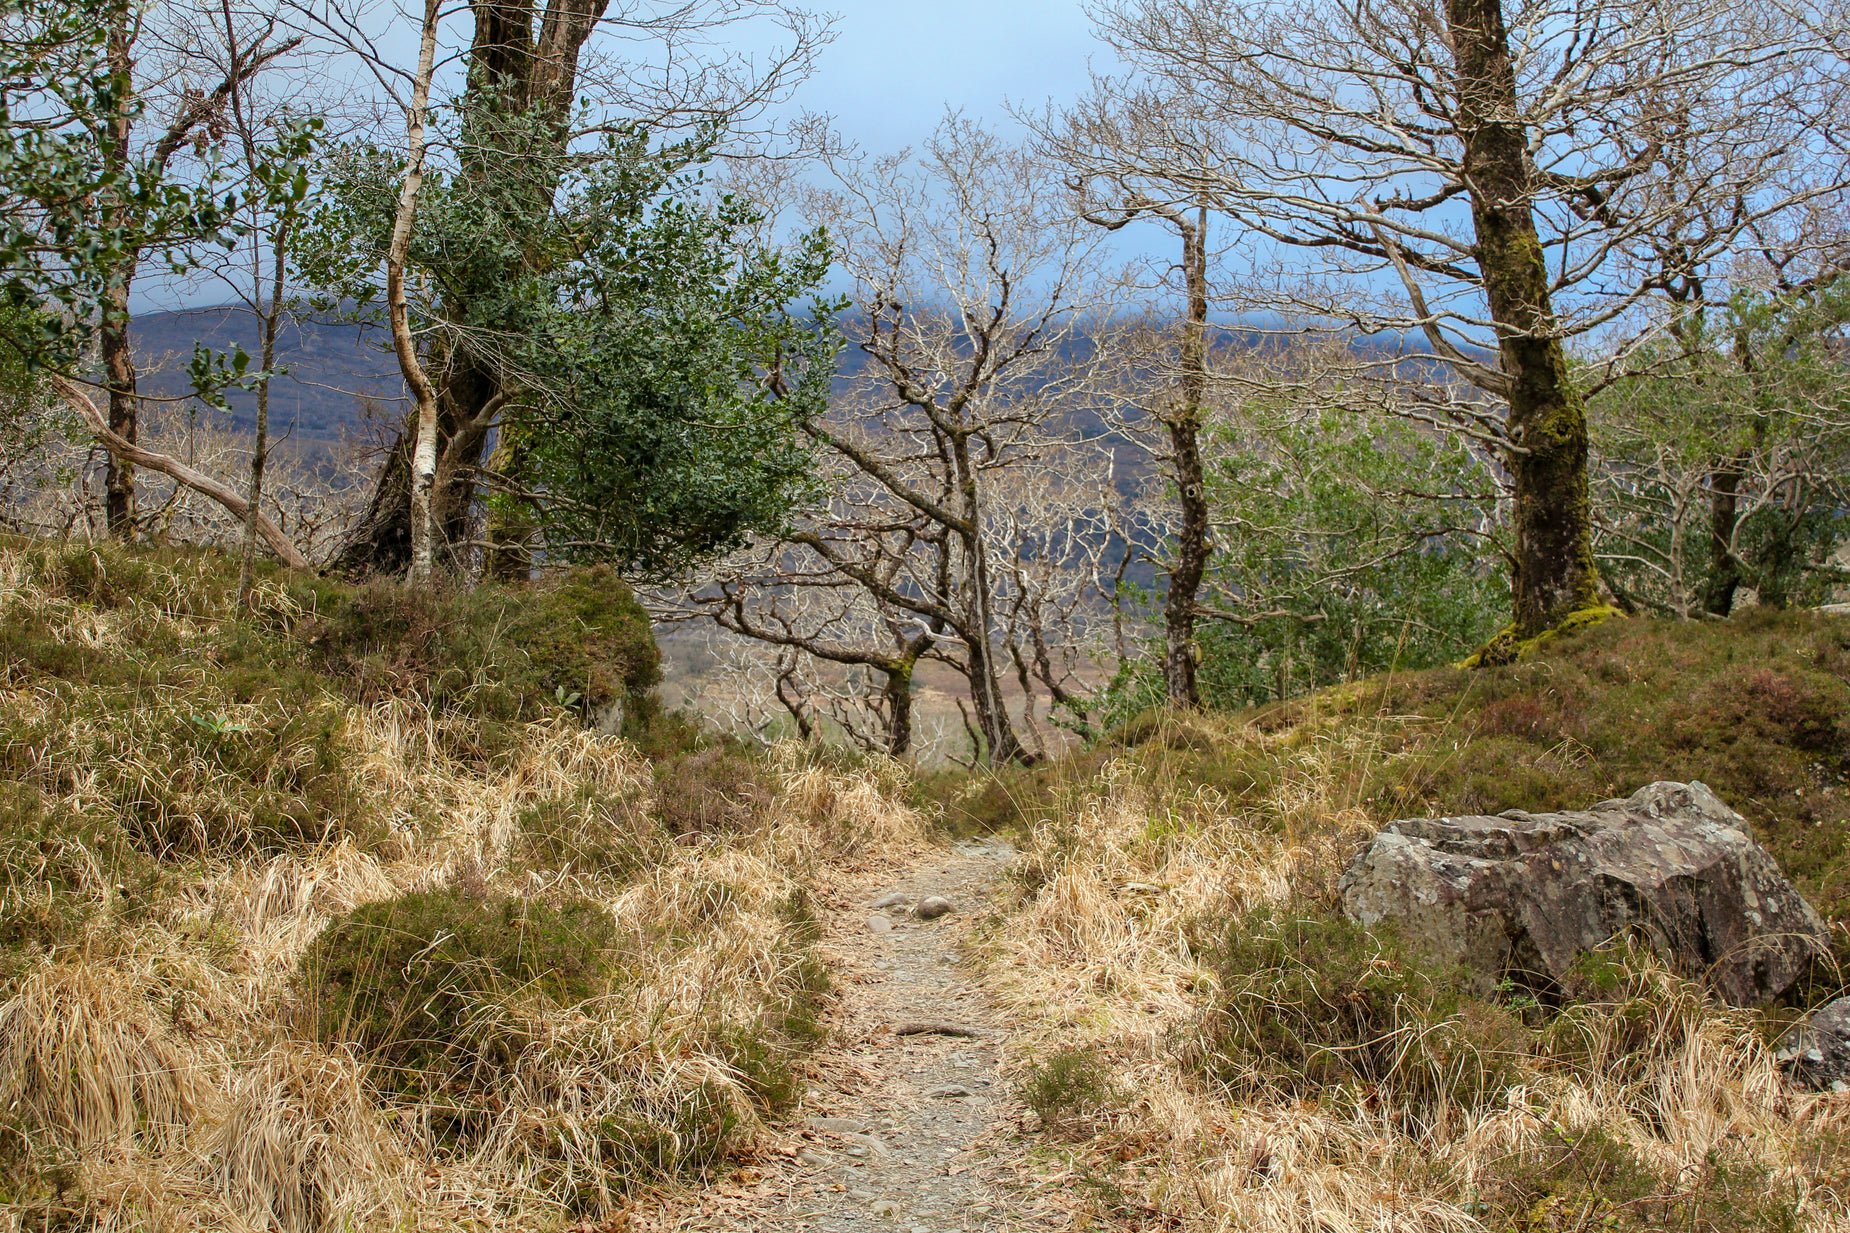 a view through the trees into a grassy area with rocks and dry grass on either side of a path